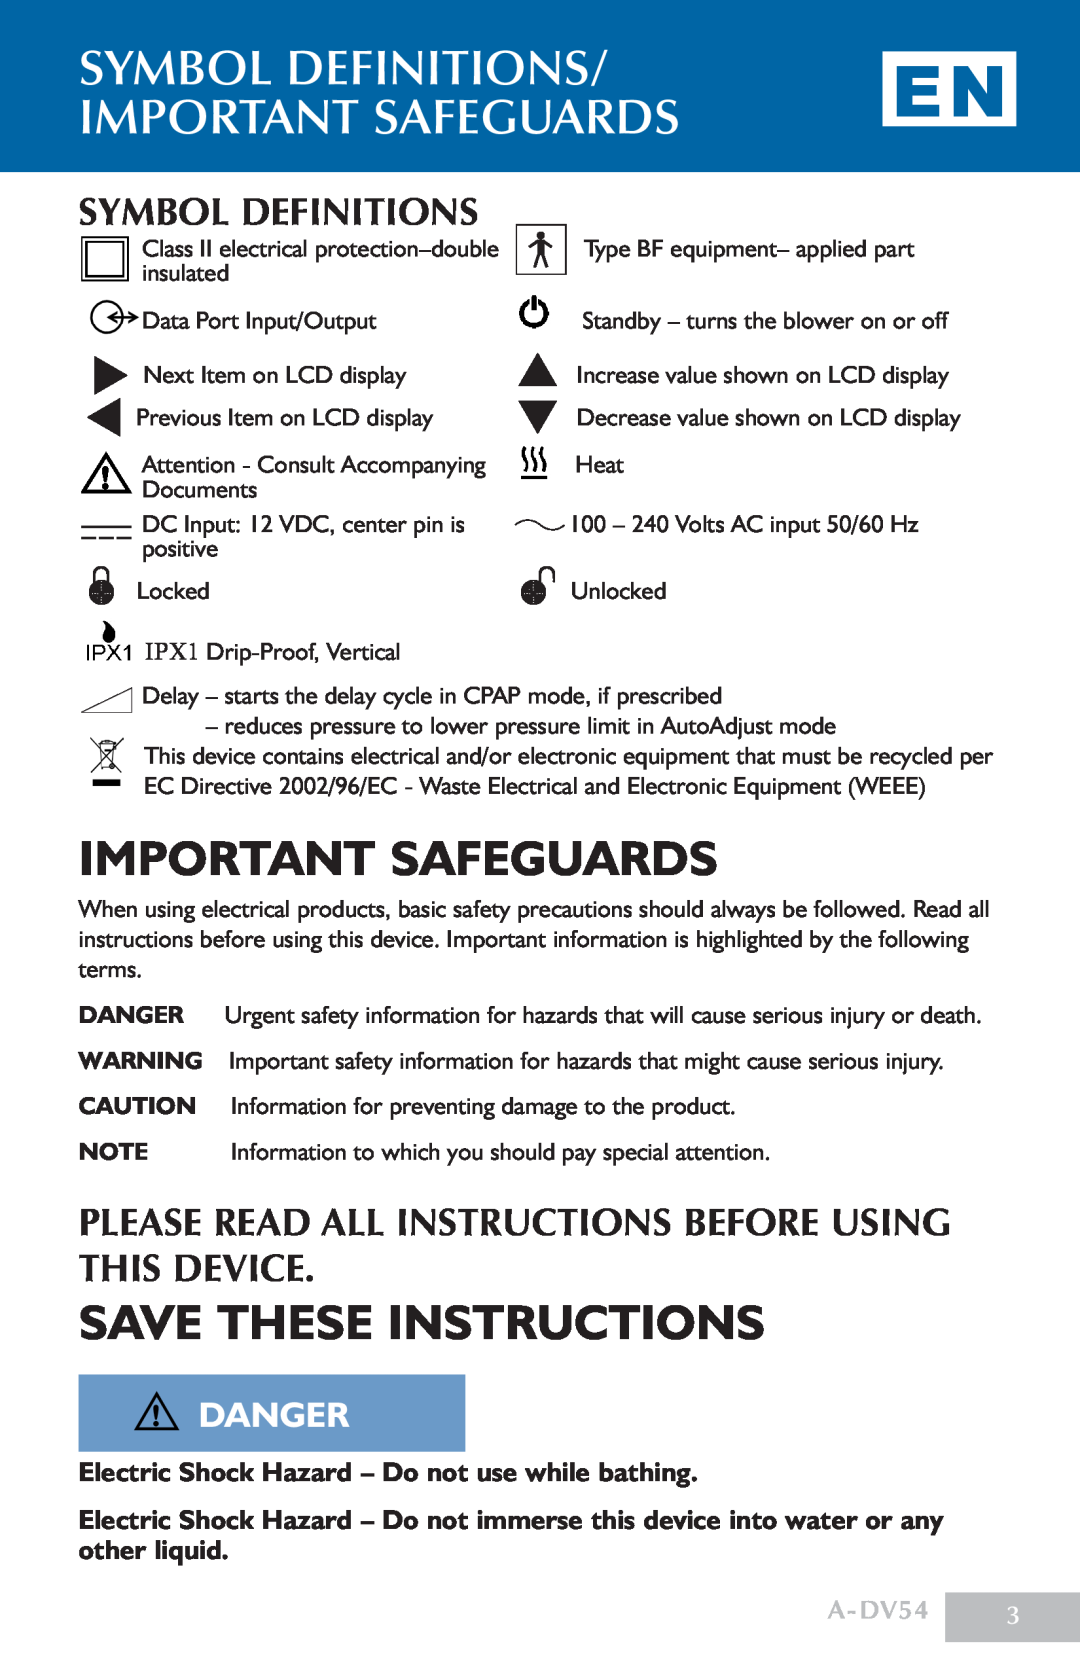 DeVillbiss Air Power Company DV54 symbol definitions/ important safeguards, Important Safeguards, save these instructions 